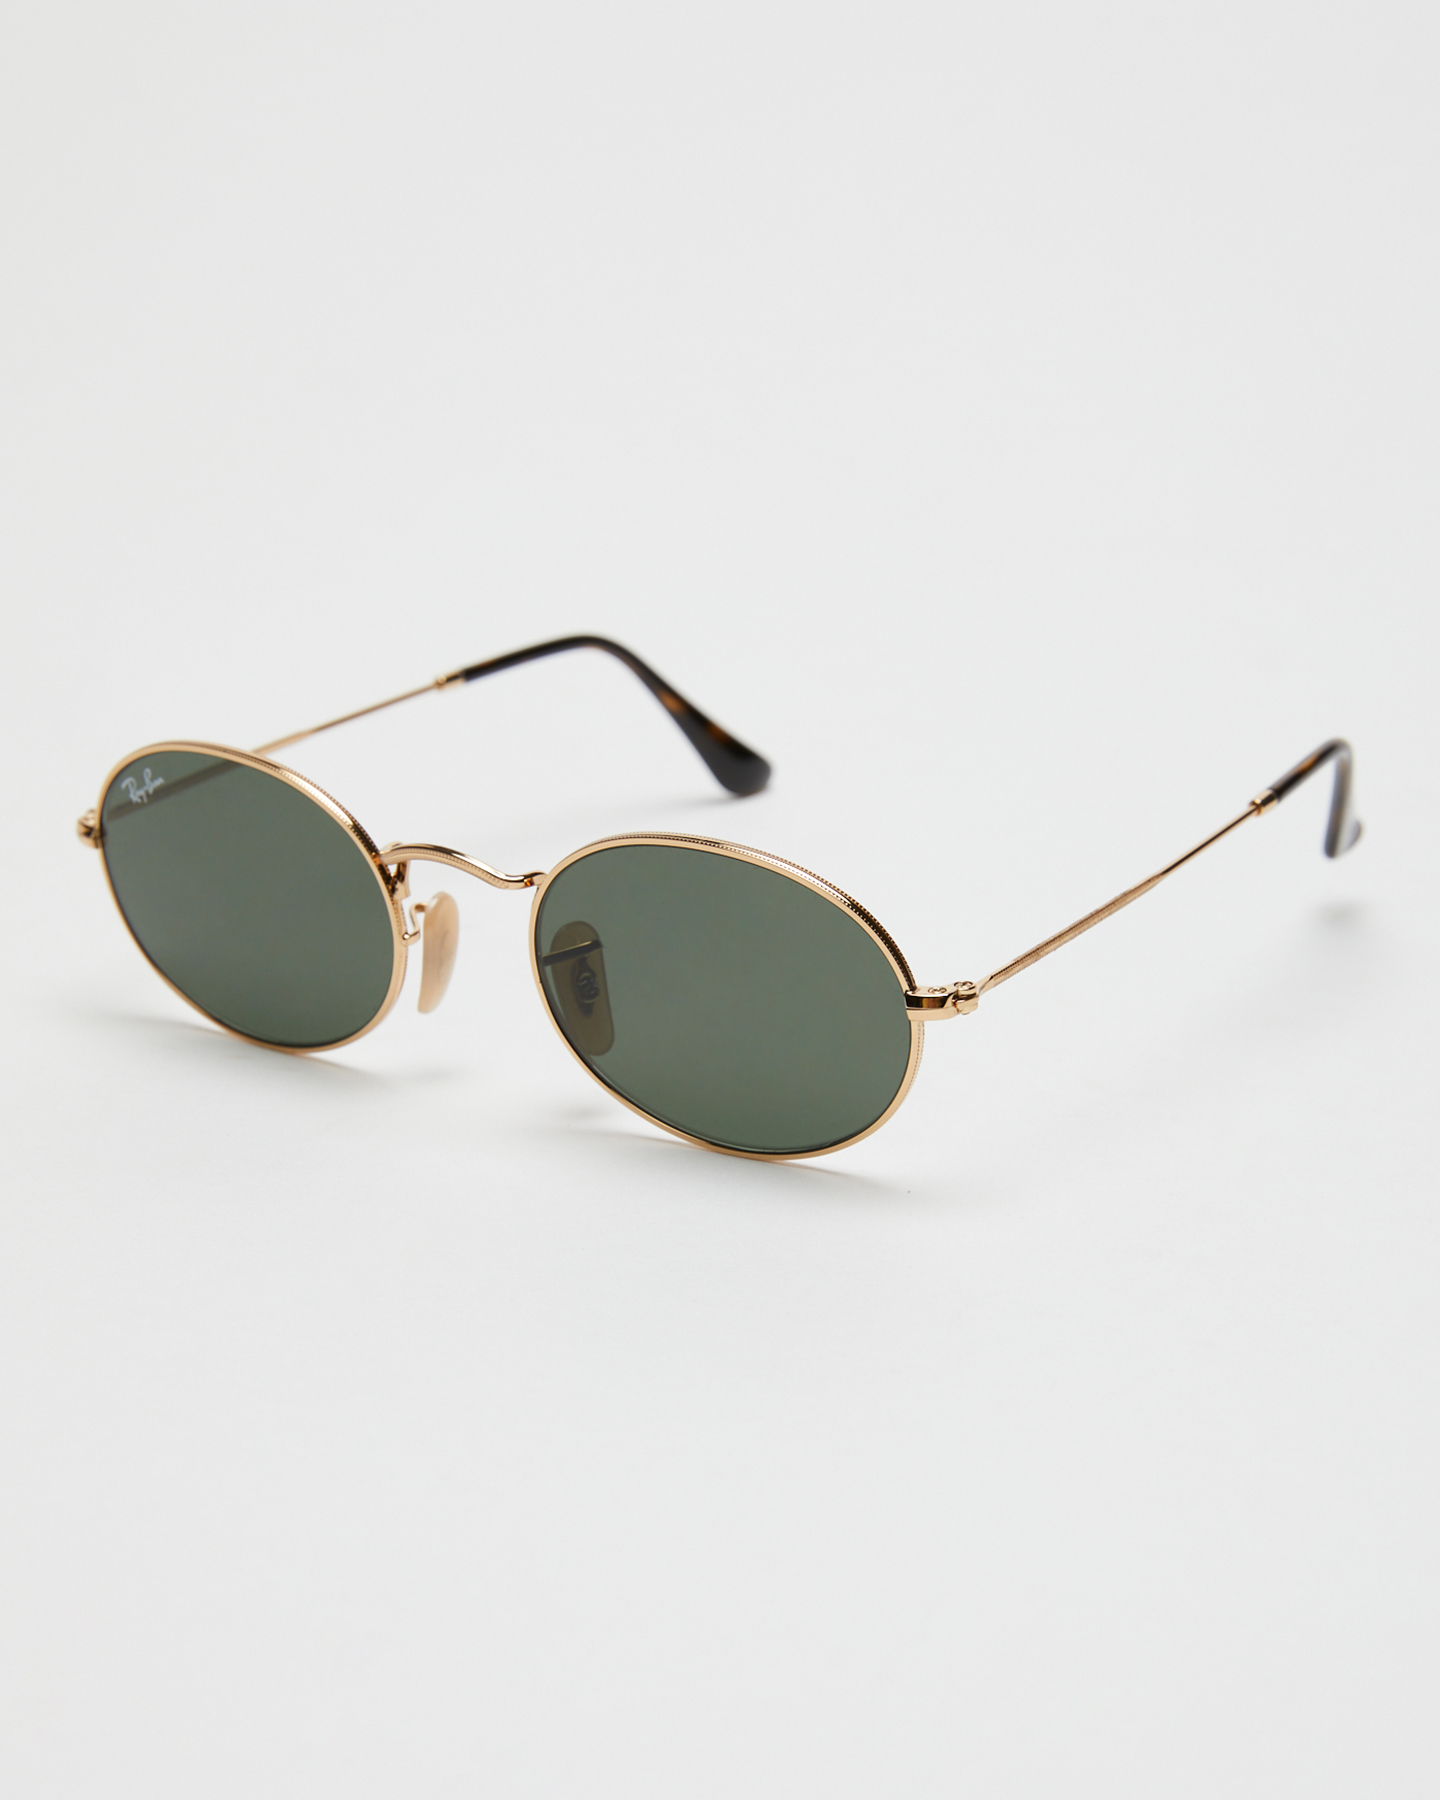 Ray-Ban Oval Sunglasses - Gold Green Classic | SurfStitch